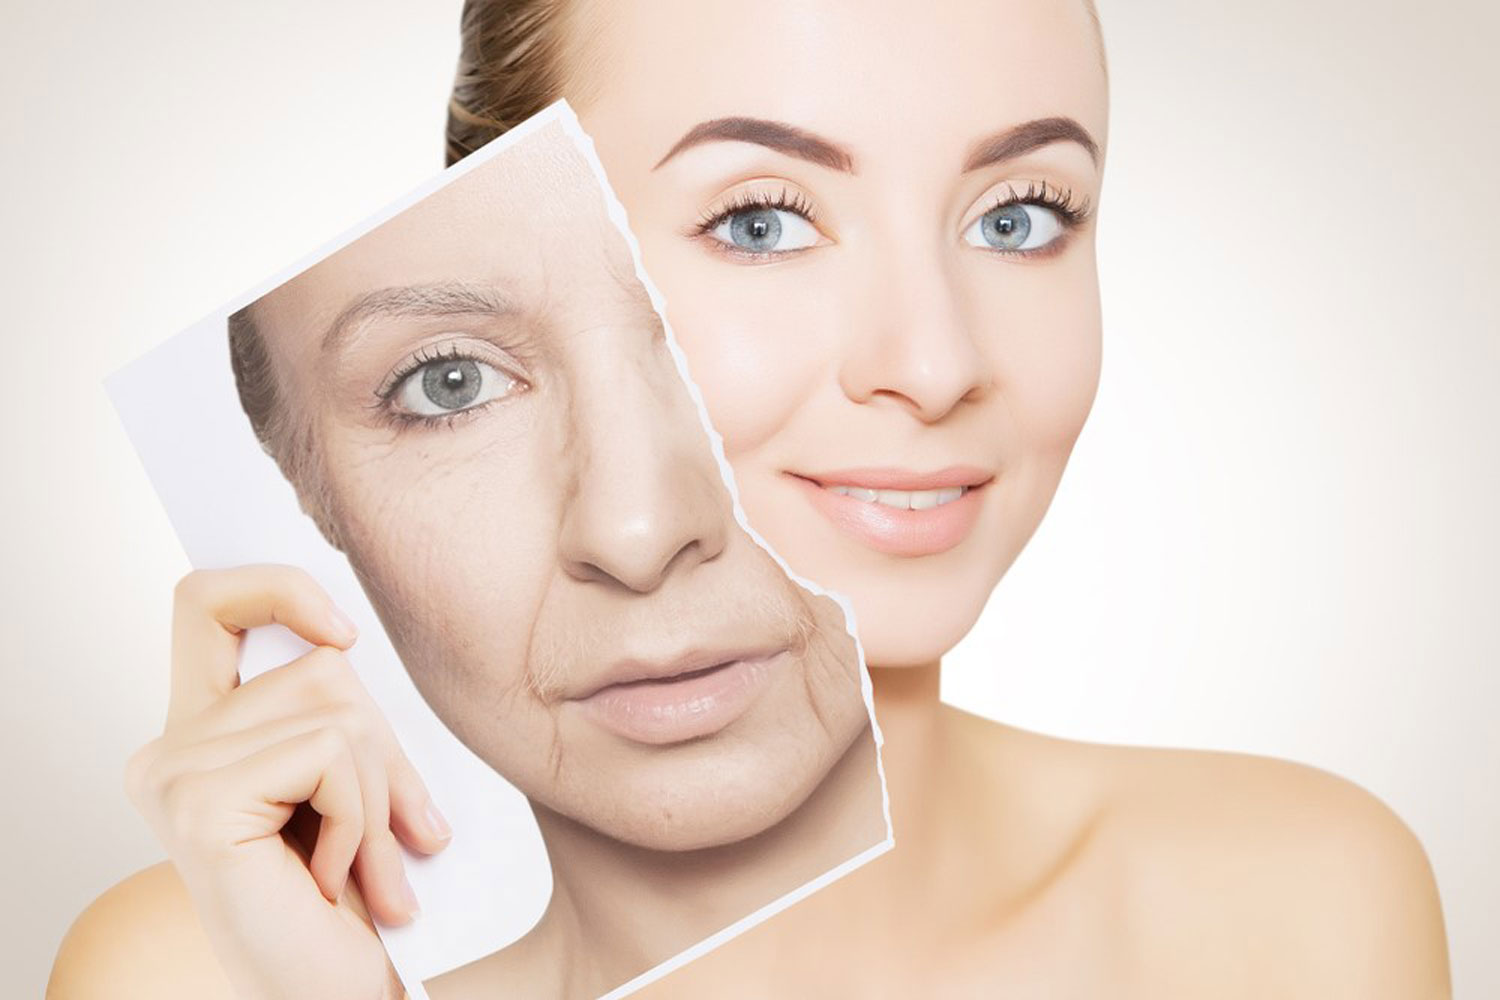 Aging skin care and anti-aging treatments